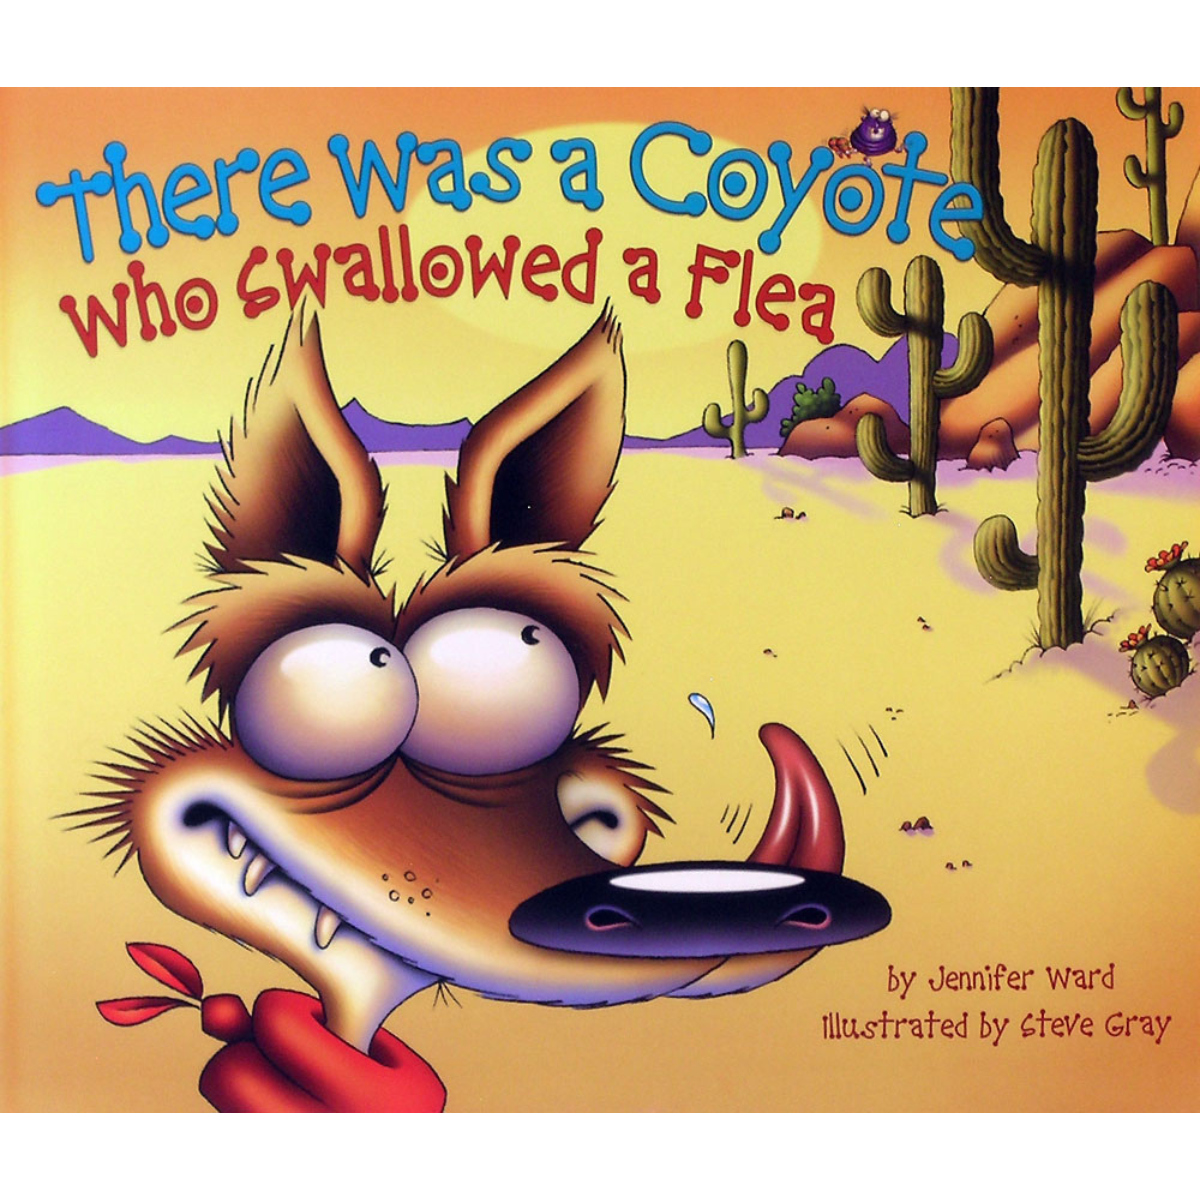 There was a Coyote who Swallowed a Flea